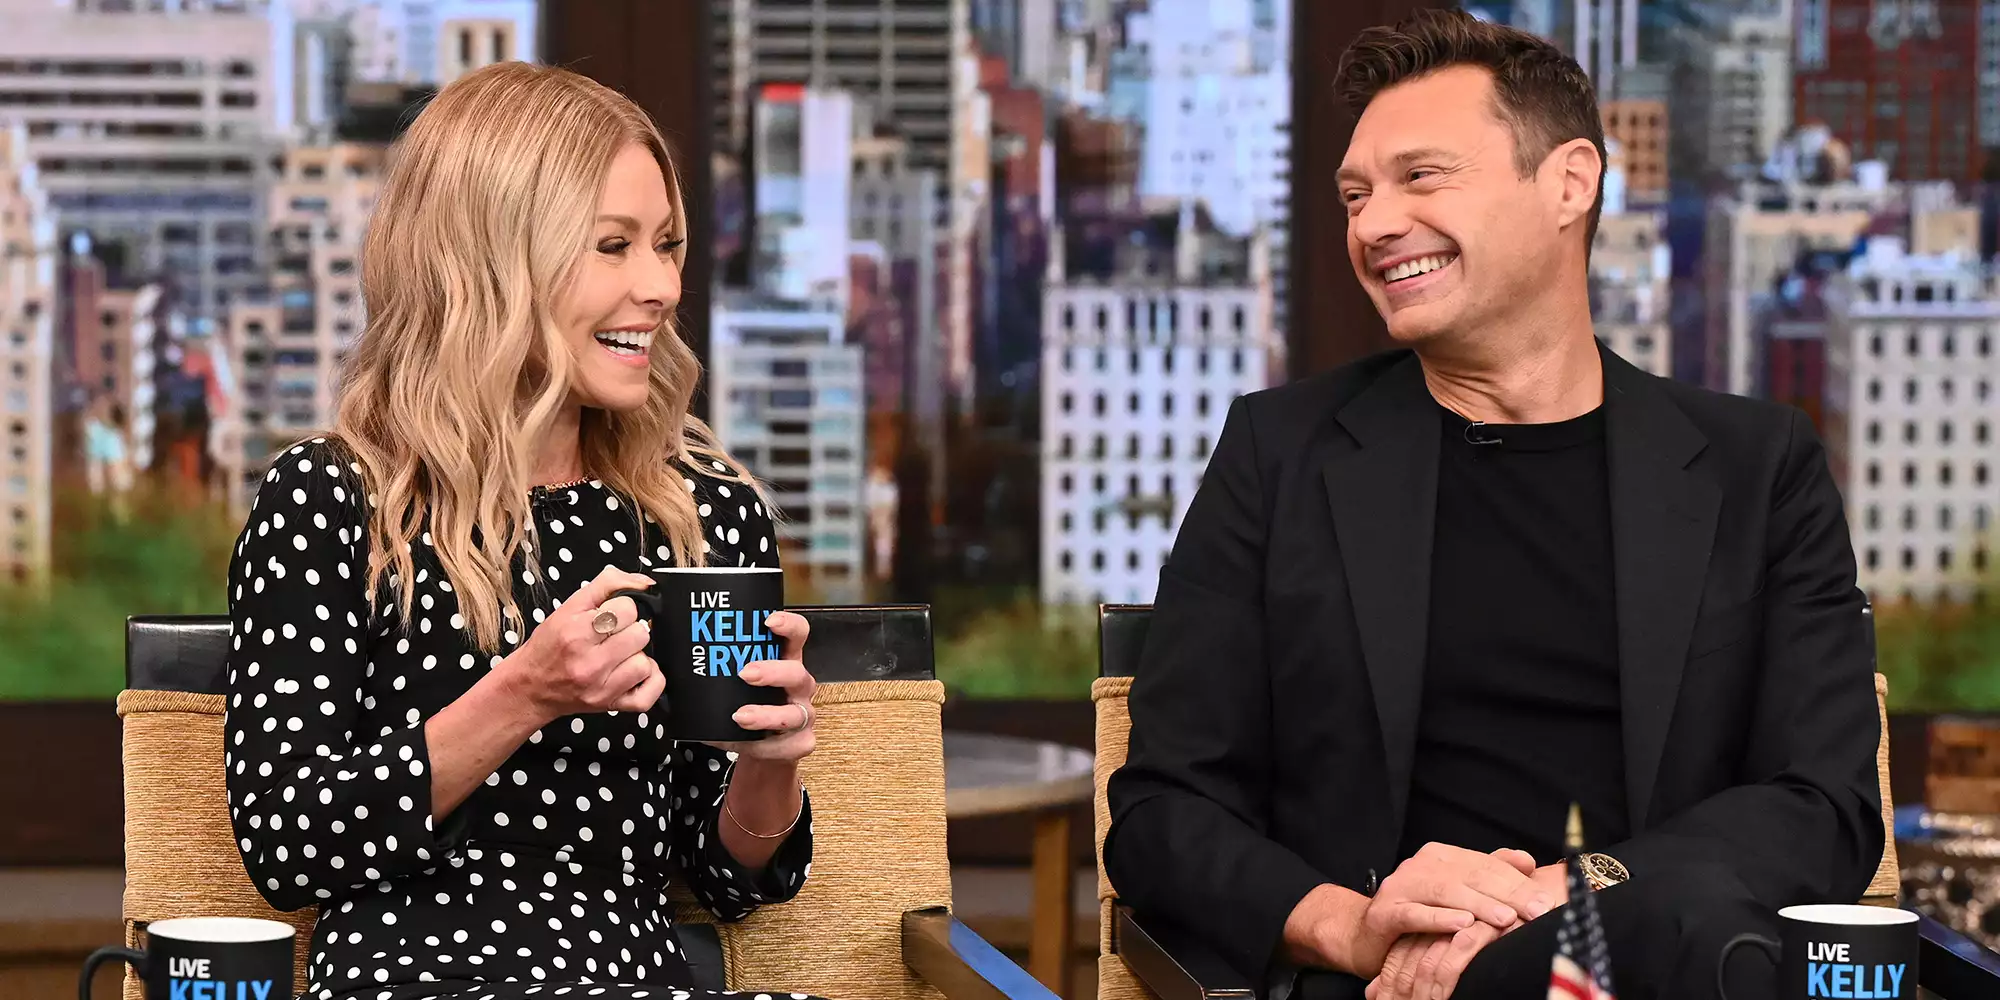 Kelly Ripa will find her replacement when she leaves Live with Kelly and Ryan